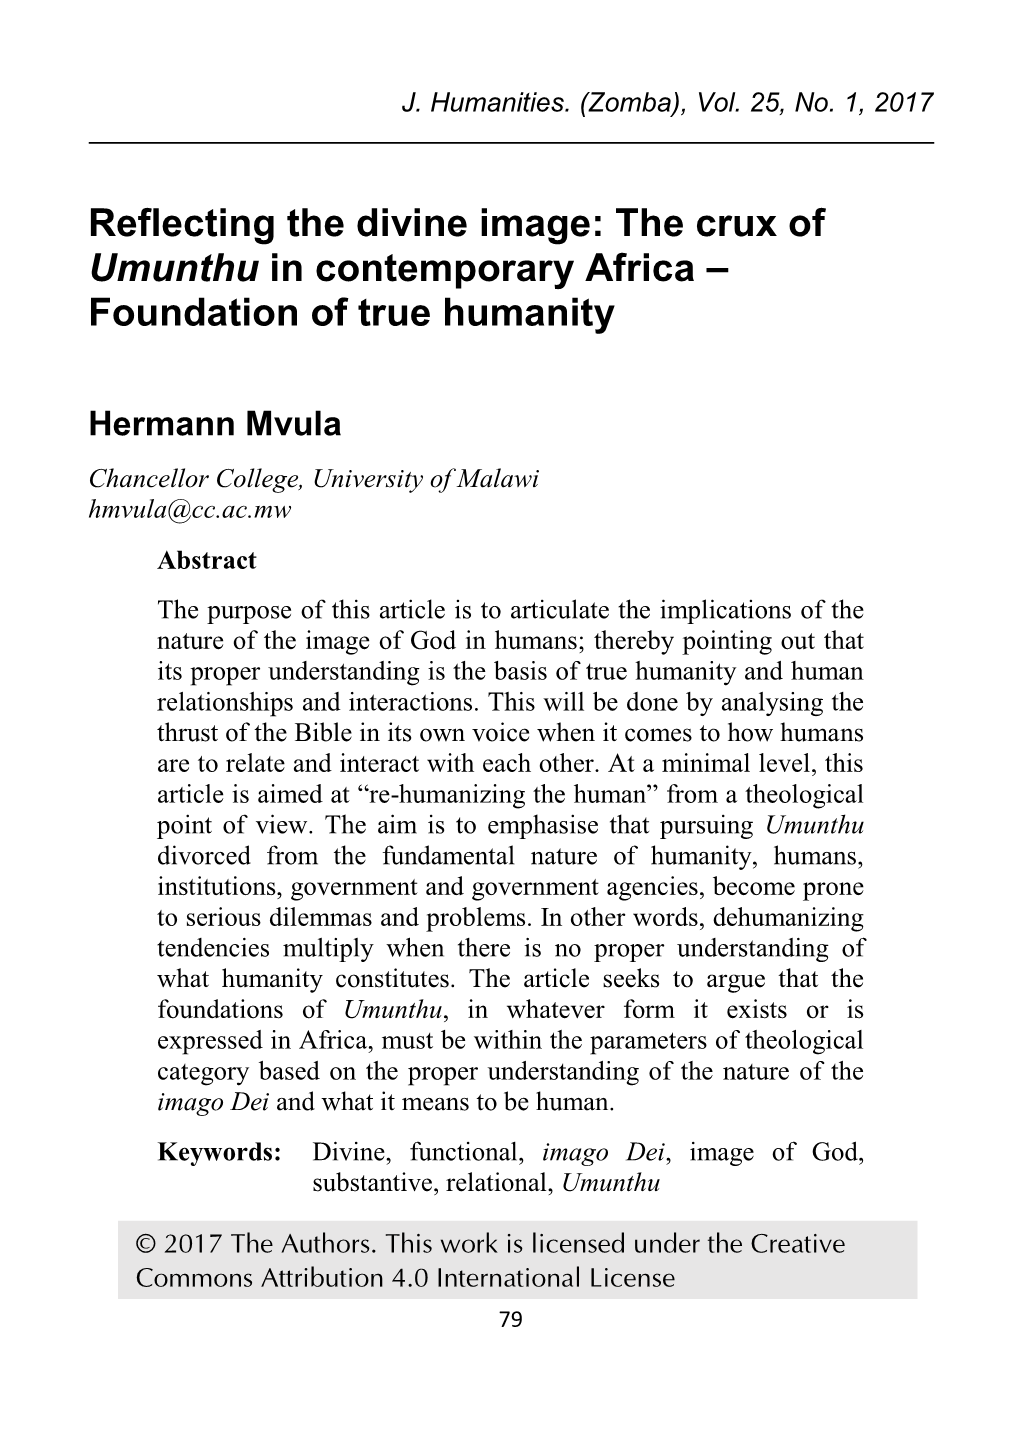 The Crux of Umunthu in Contemporary Africa – Foundation of True Humanity